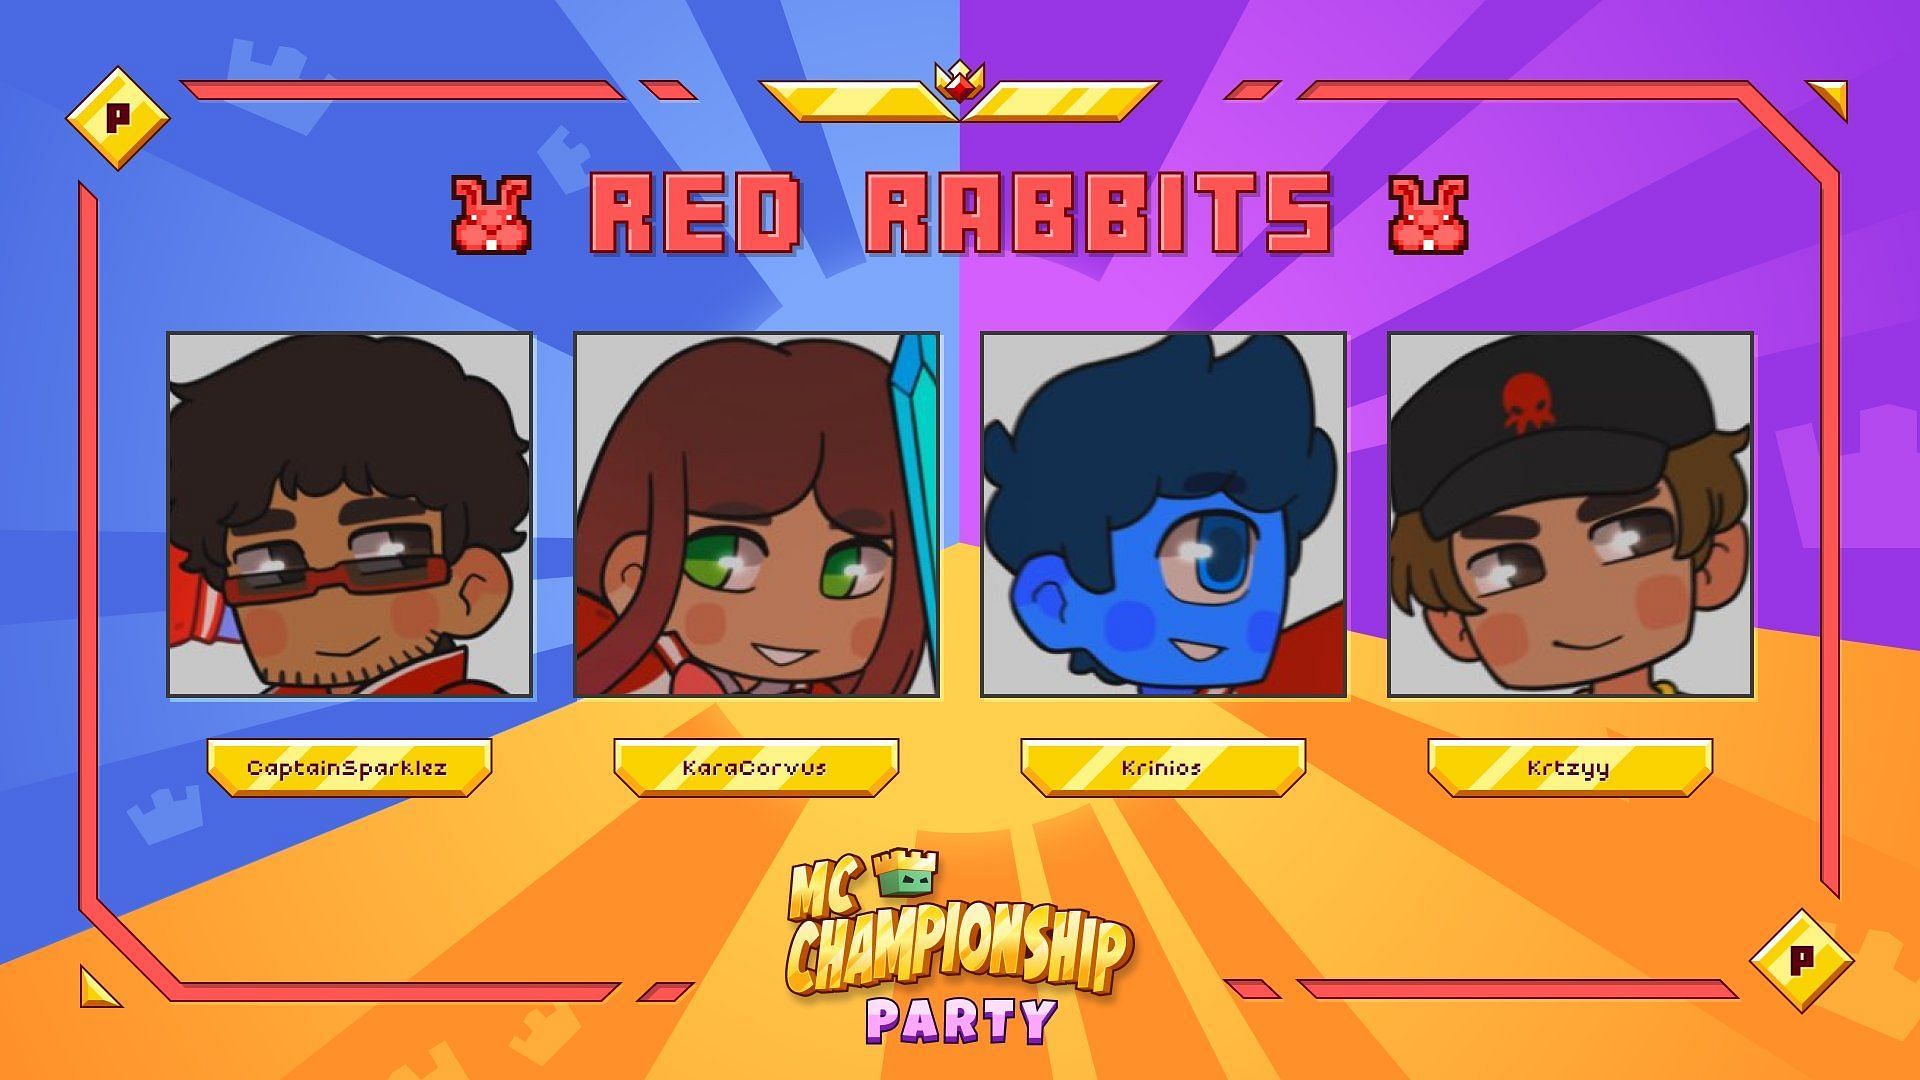 The Red Rabbits for MCC Party (Image via Noxcrew)